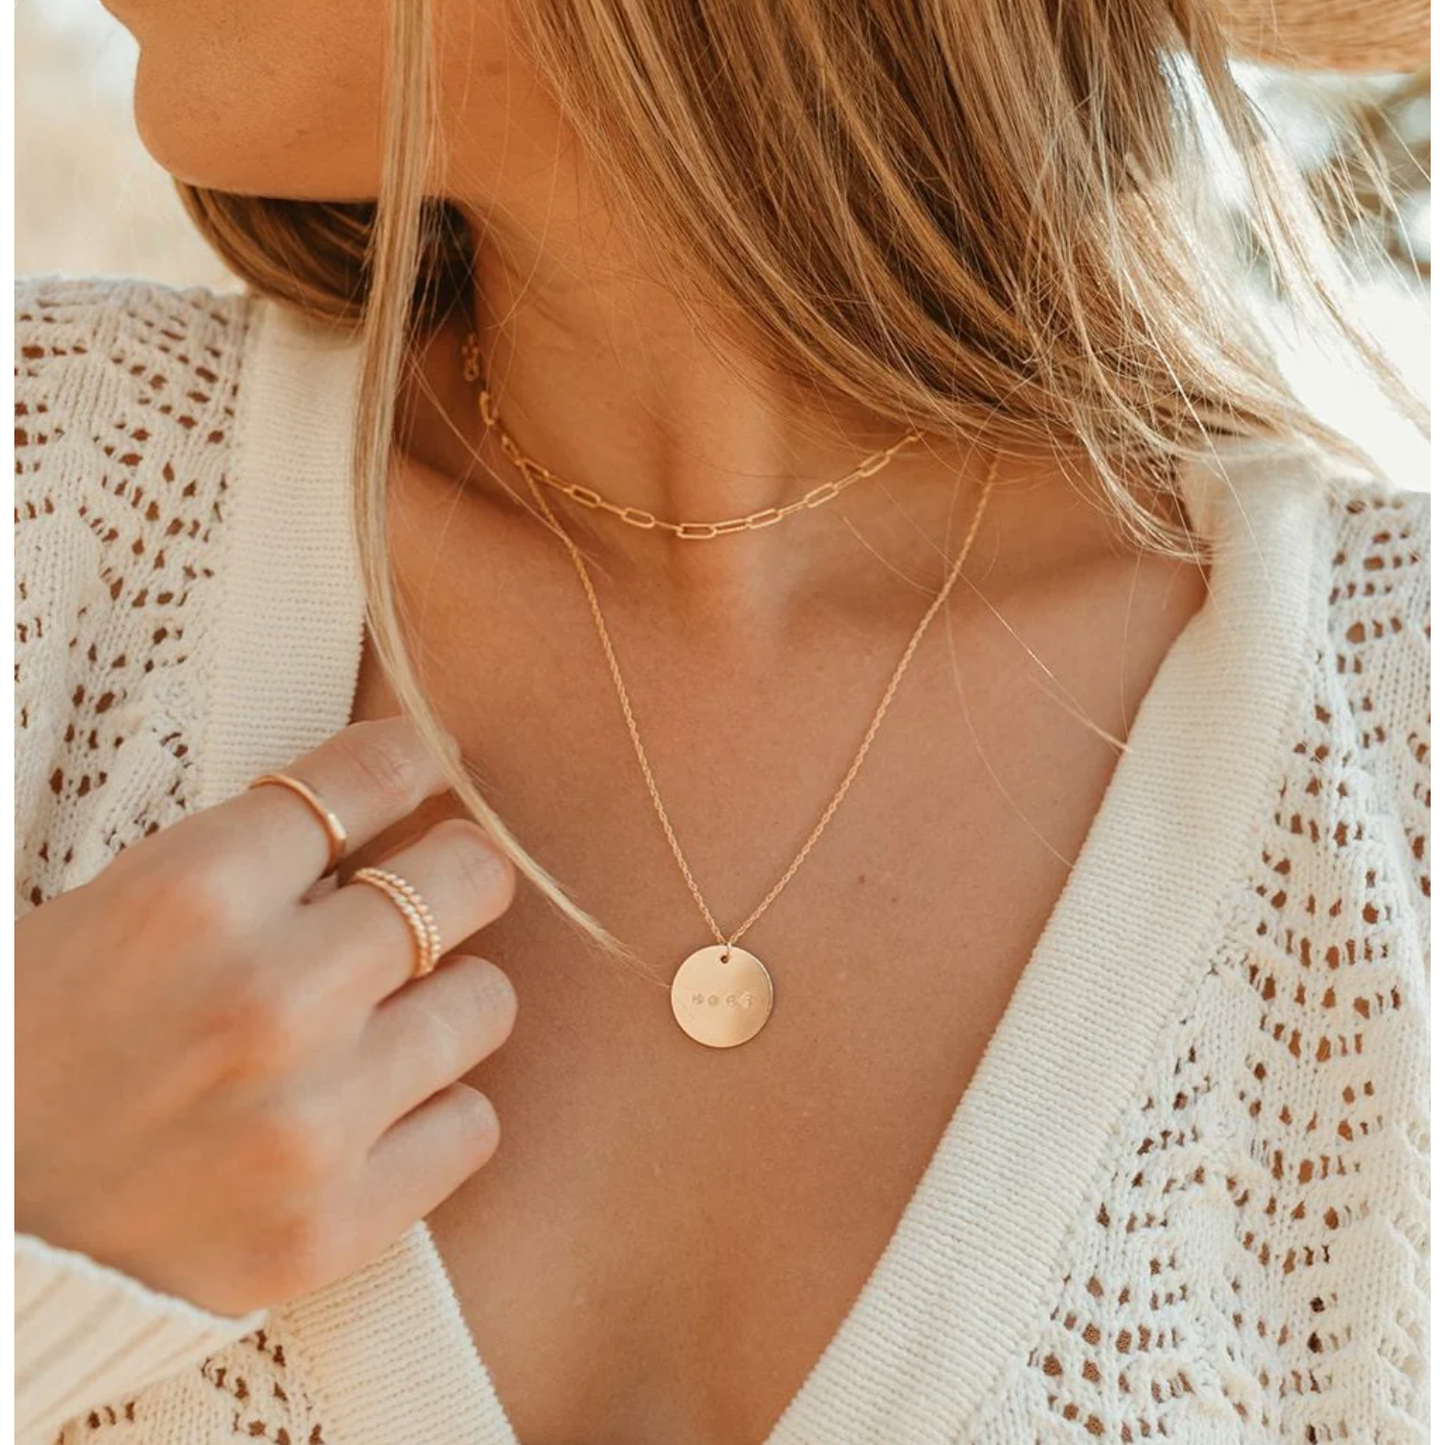 Our Spare Change Rylee Disc Necklace - Hope